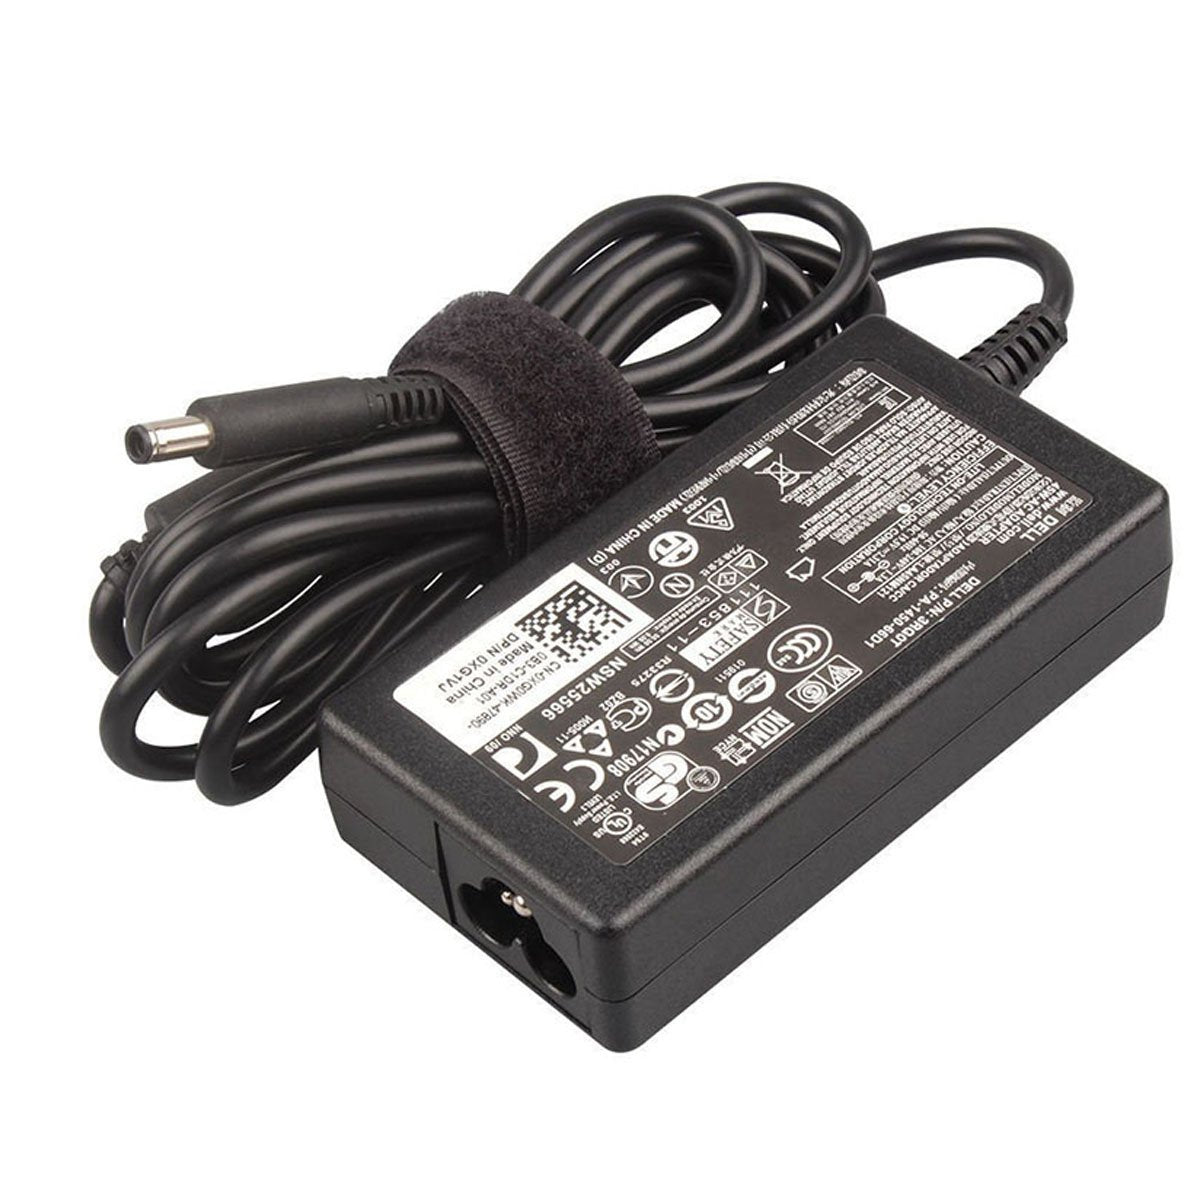 Dell Inspiron 15 7569 Original 45W Laptop Charger Adapter With Power Cord 19.5V 4.5mm Pin